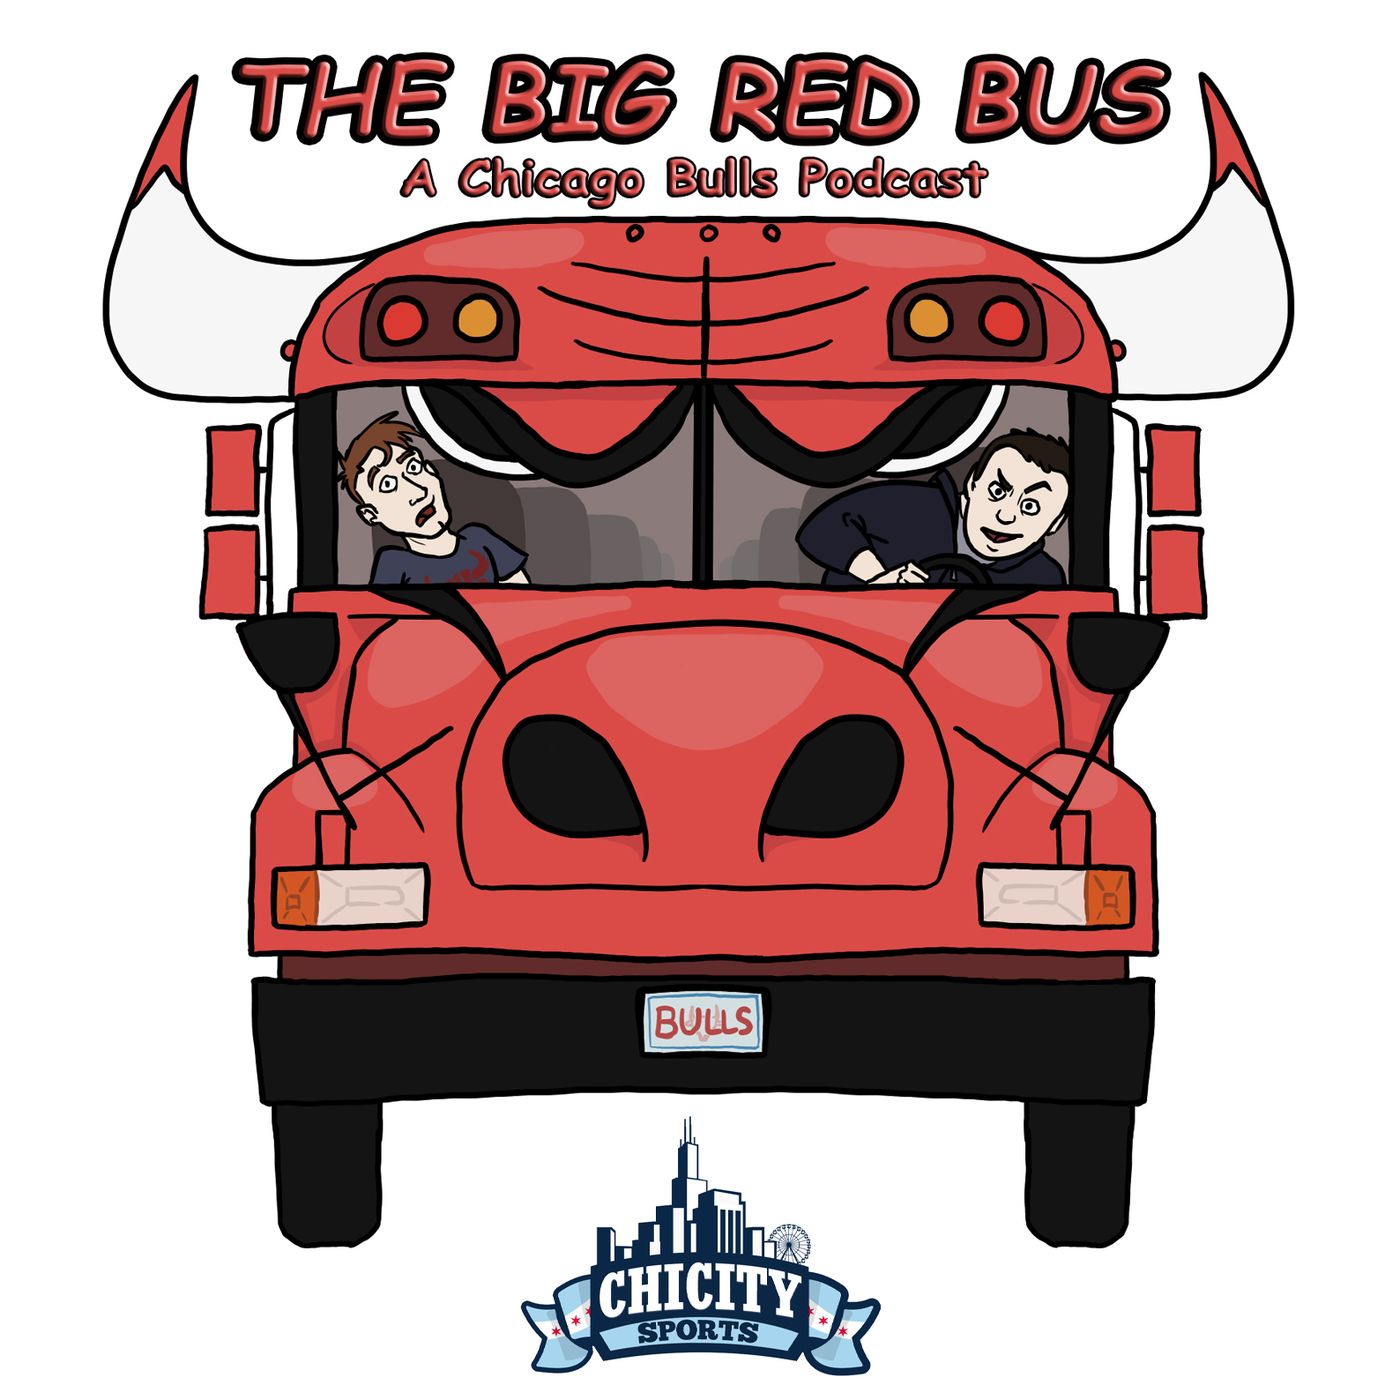 The Big Red Bus podcast